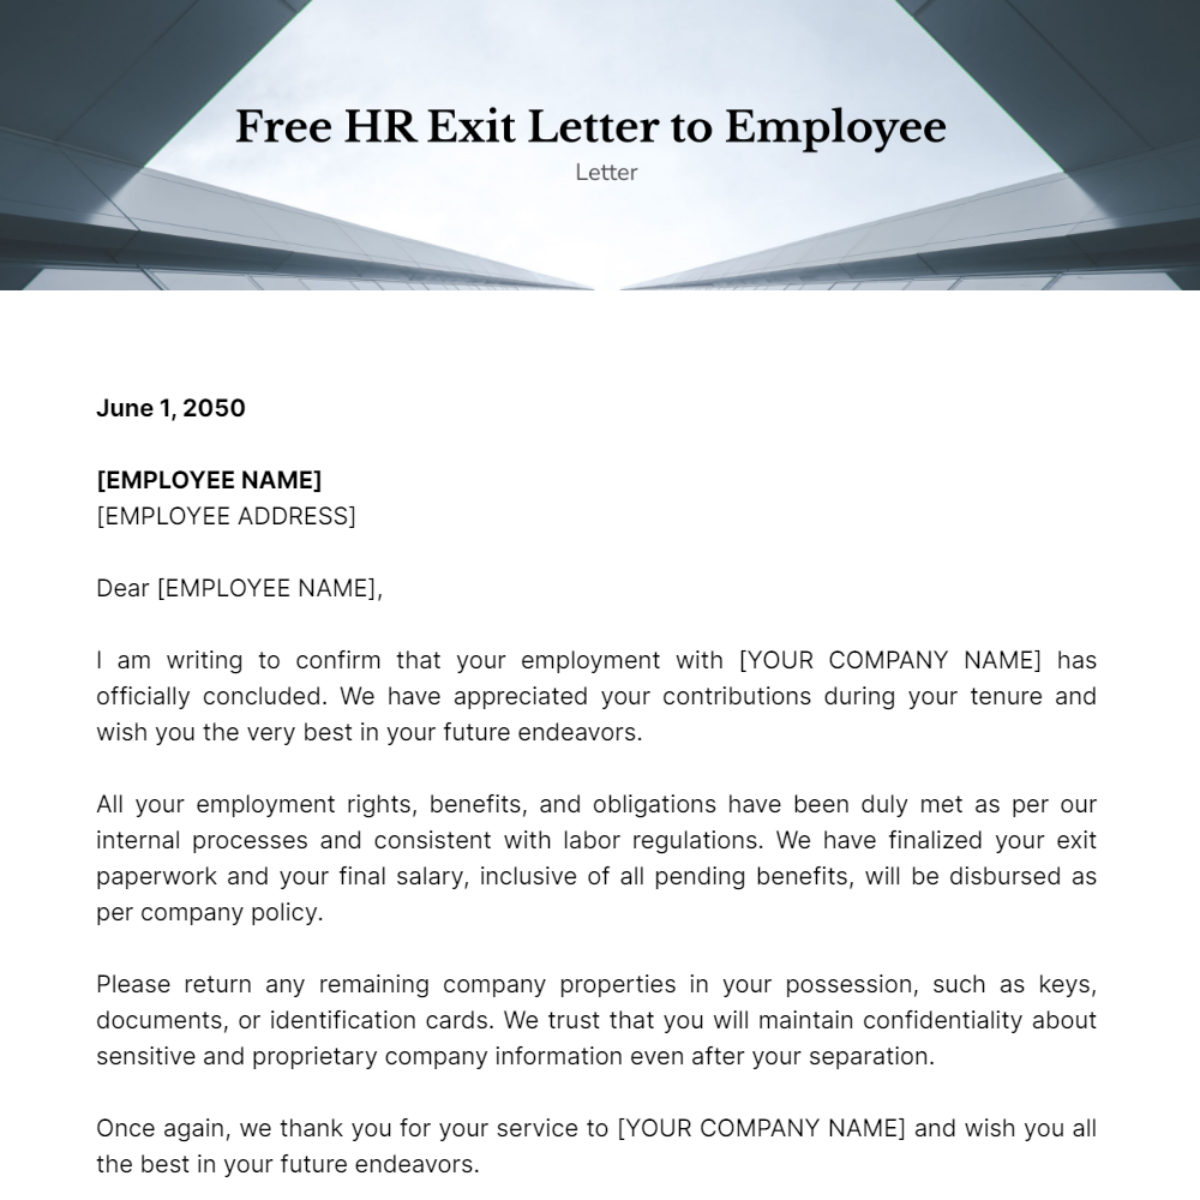 HR Exit Letter to Employee Template